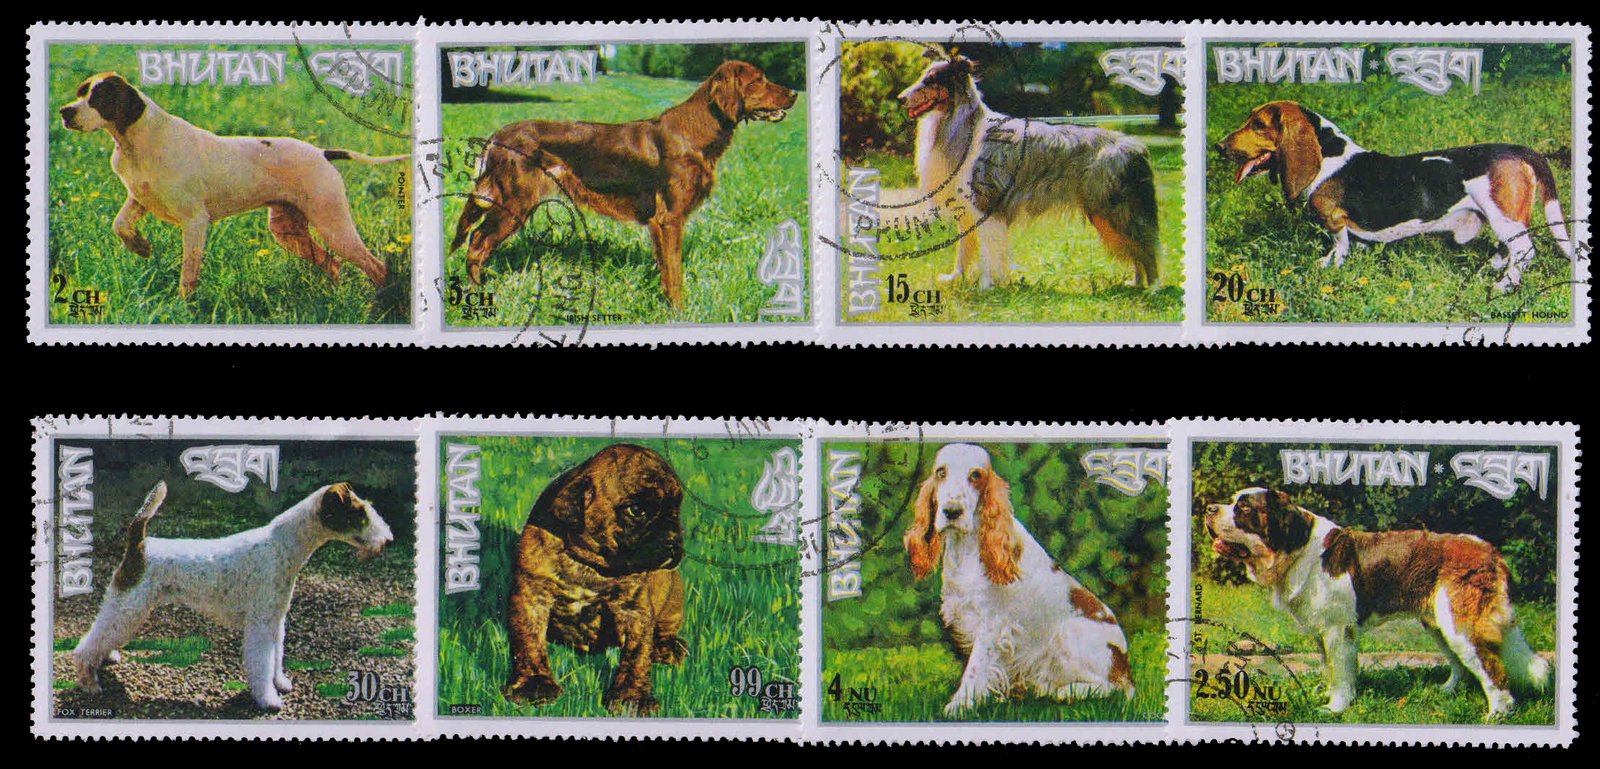 BHUTAN 1973-Dogs-Complete Set of 8 Stamps-Used